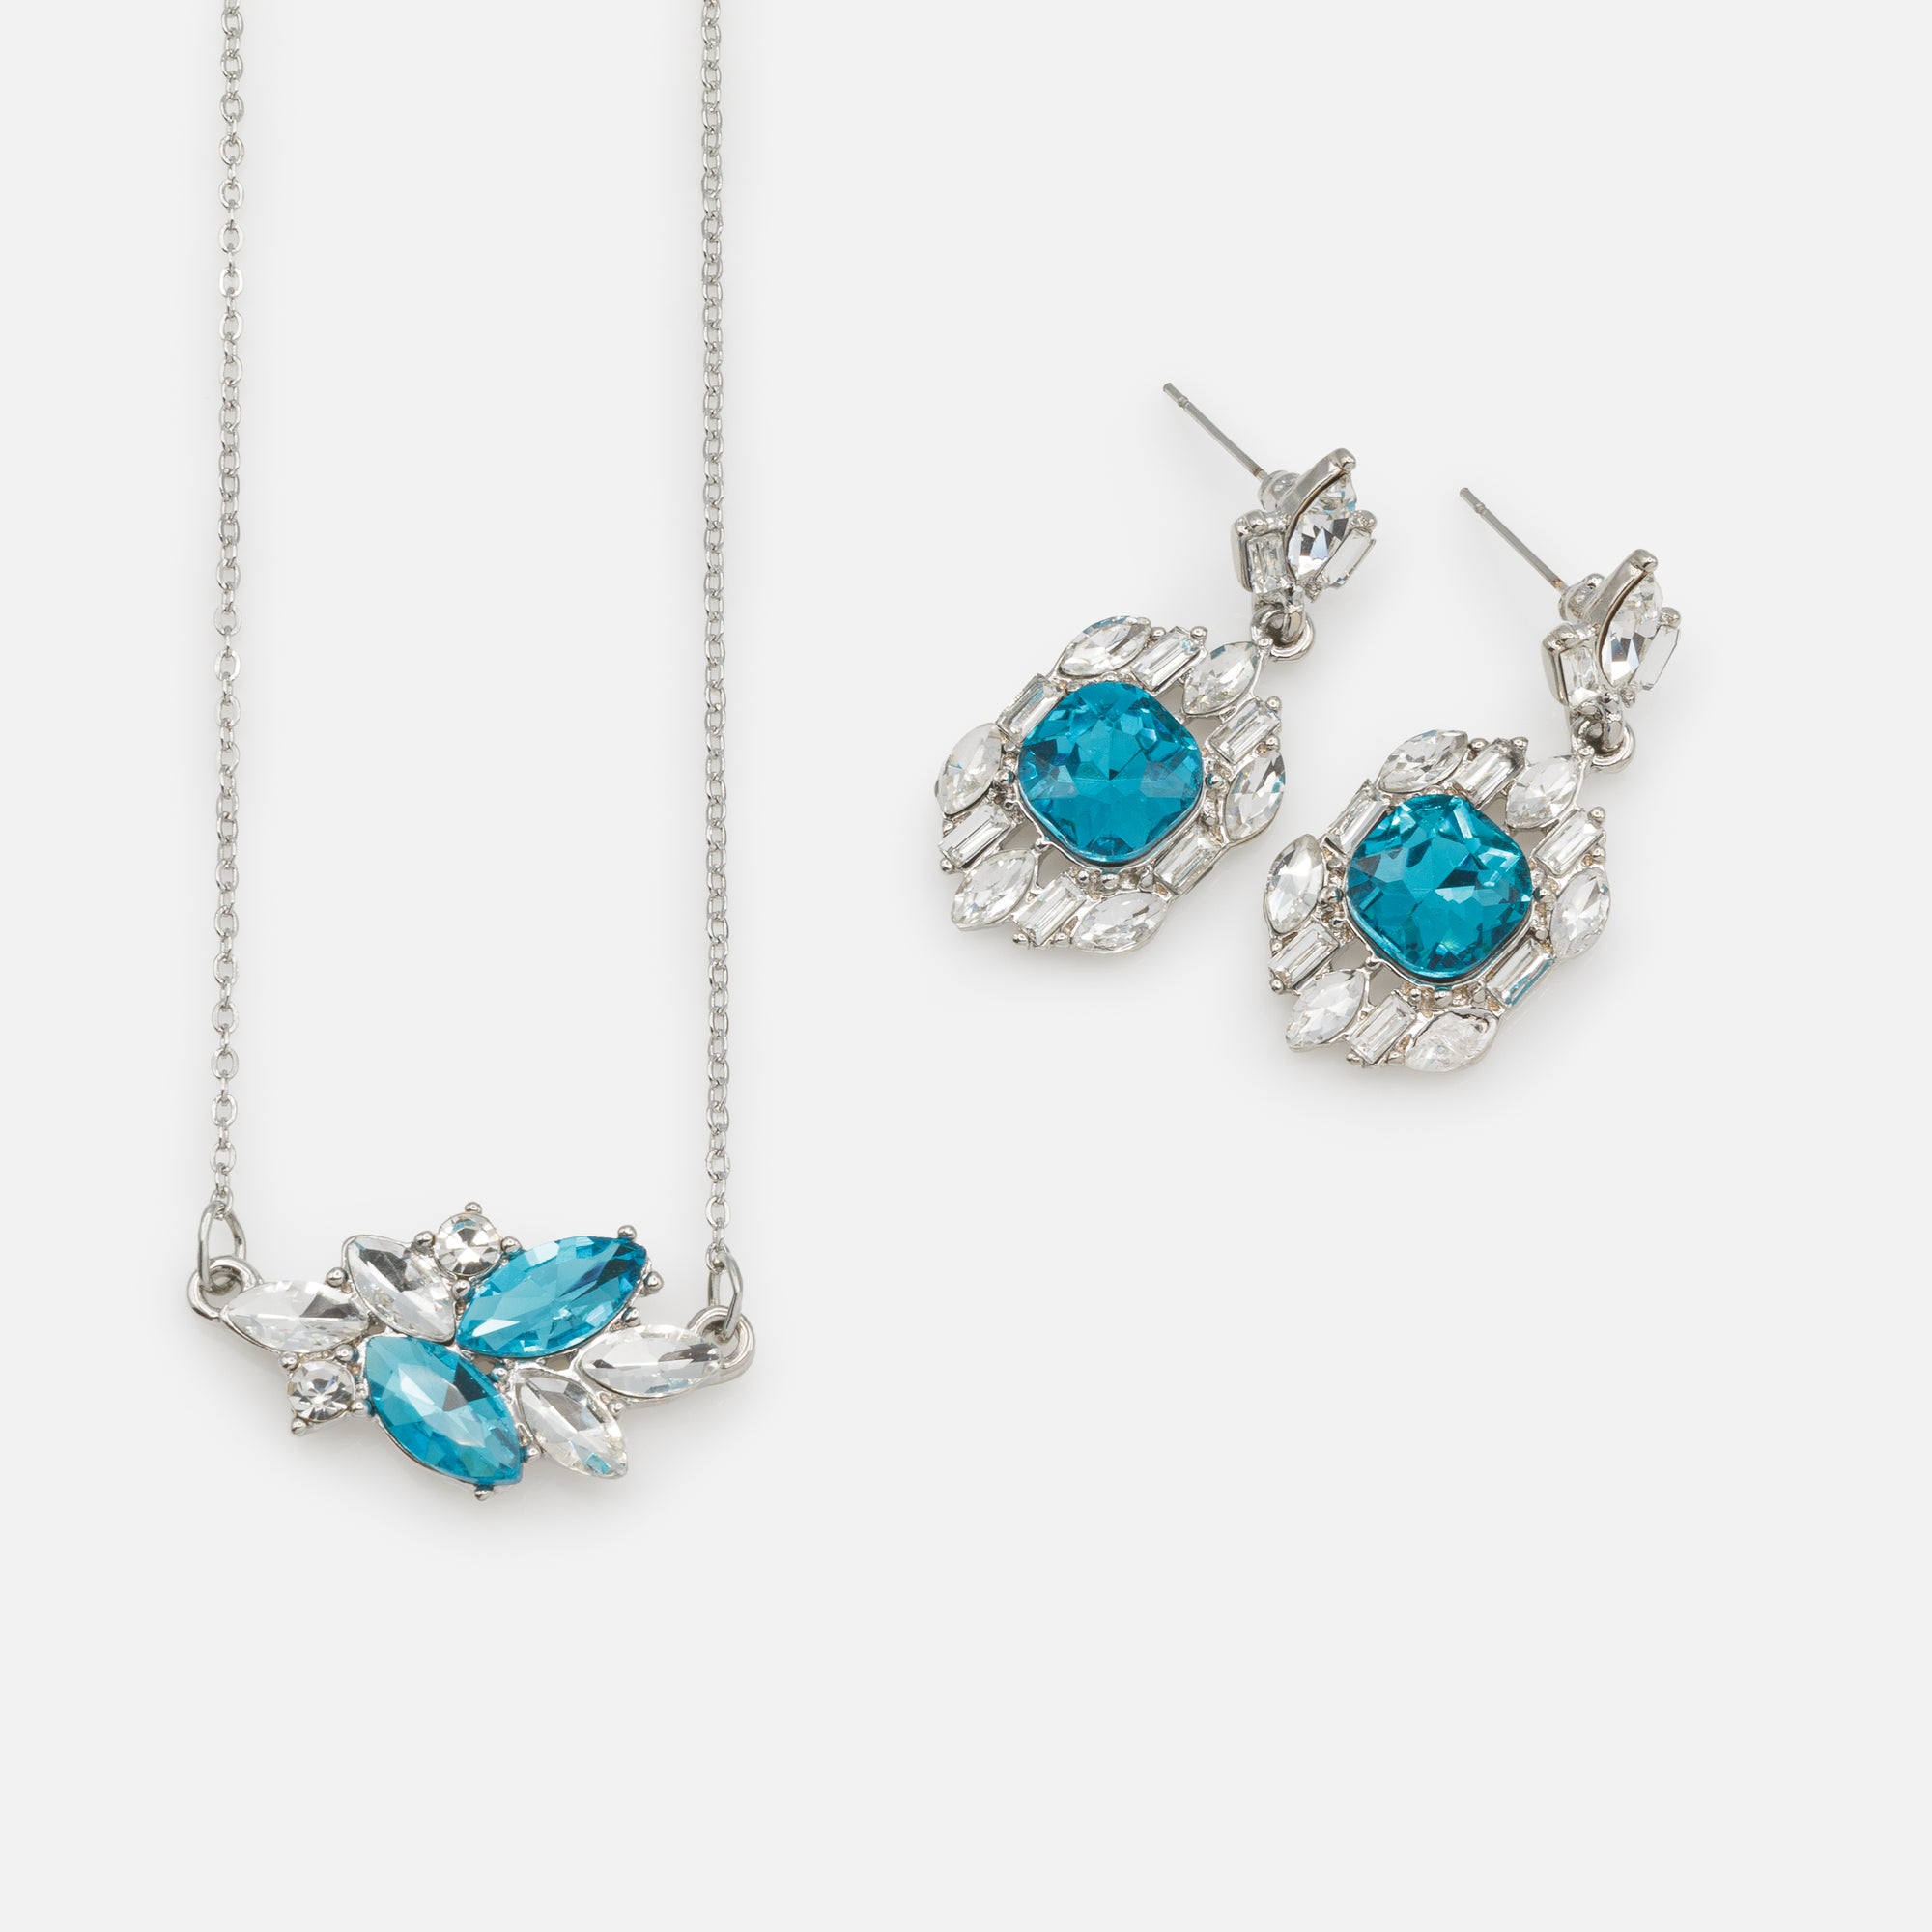 Silver necklace and dangling earrings set with white and turquoise stones